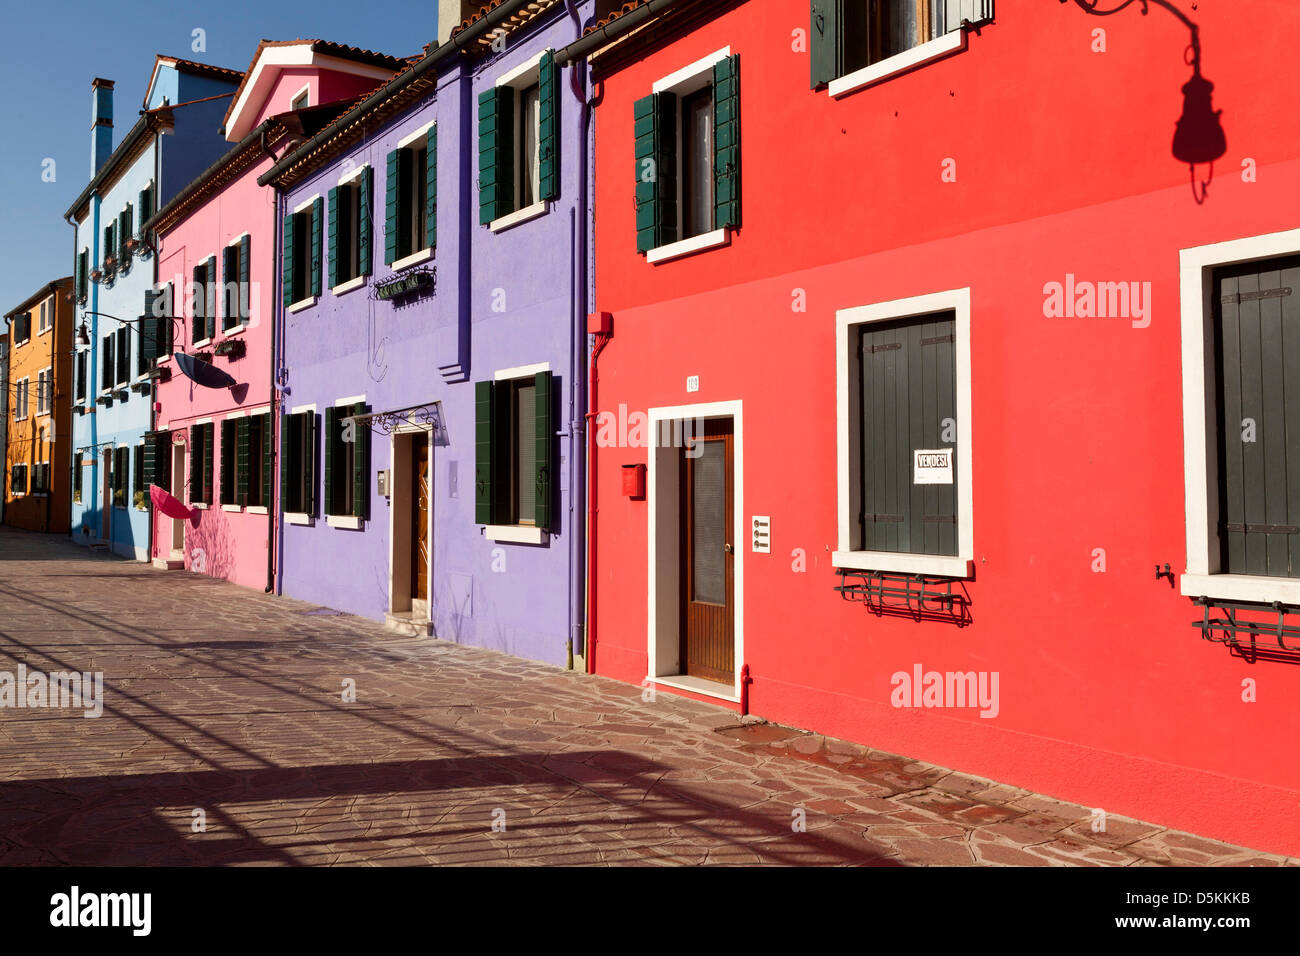 The island of Burano is famous for its brightly coloured houses. Stock Photo